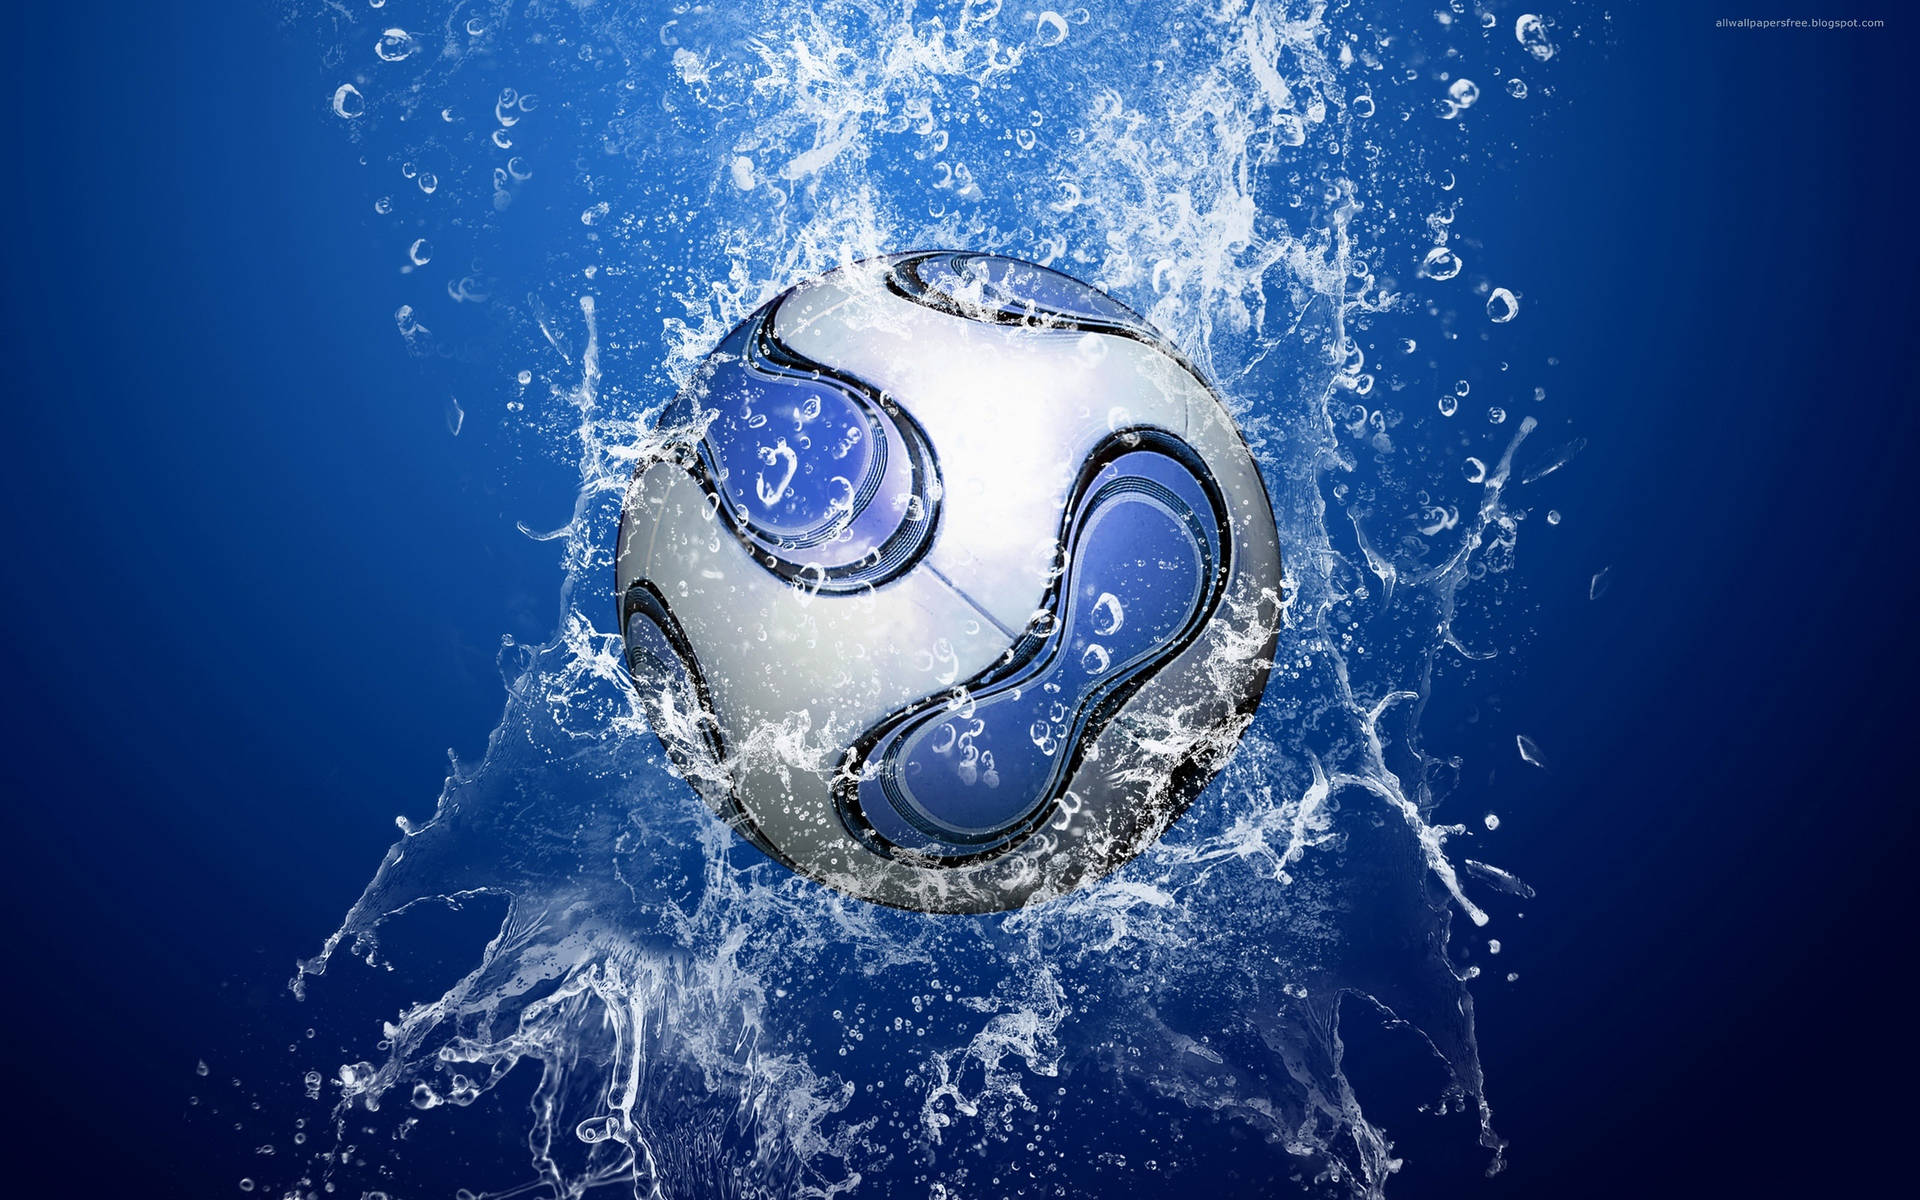 Cool Soccer Ball Water Effect Background